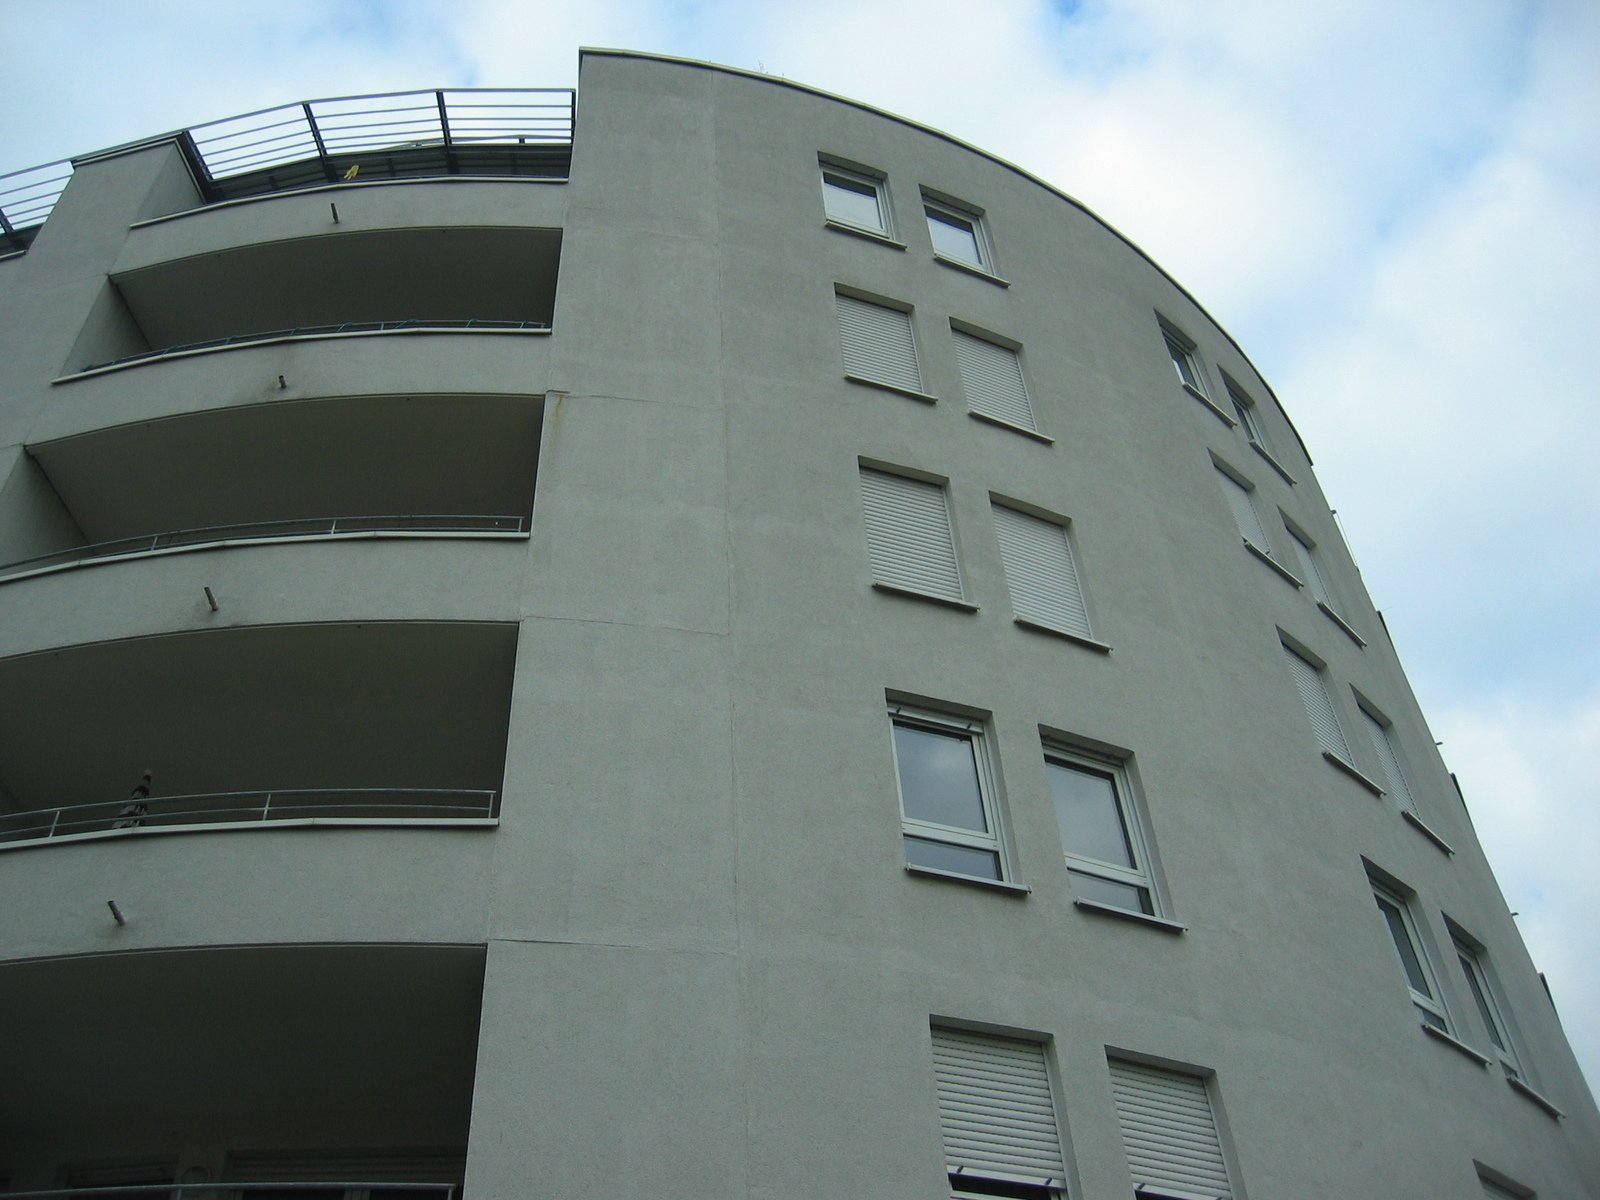 a tall building has several balconies and lots of windows